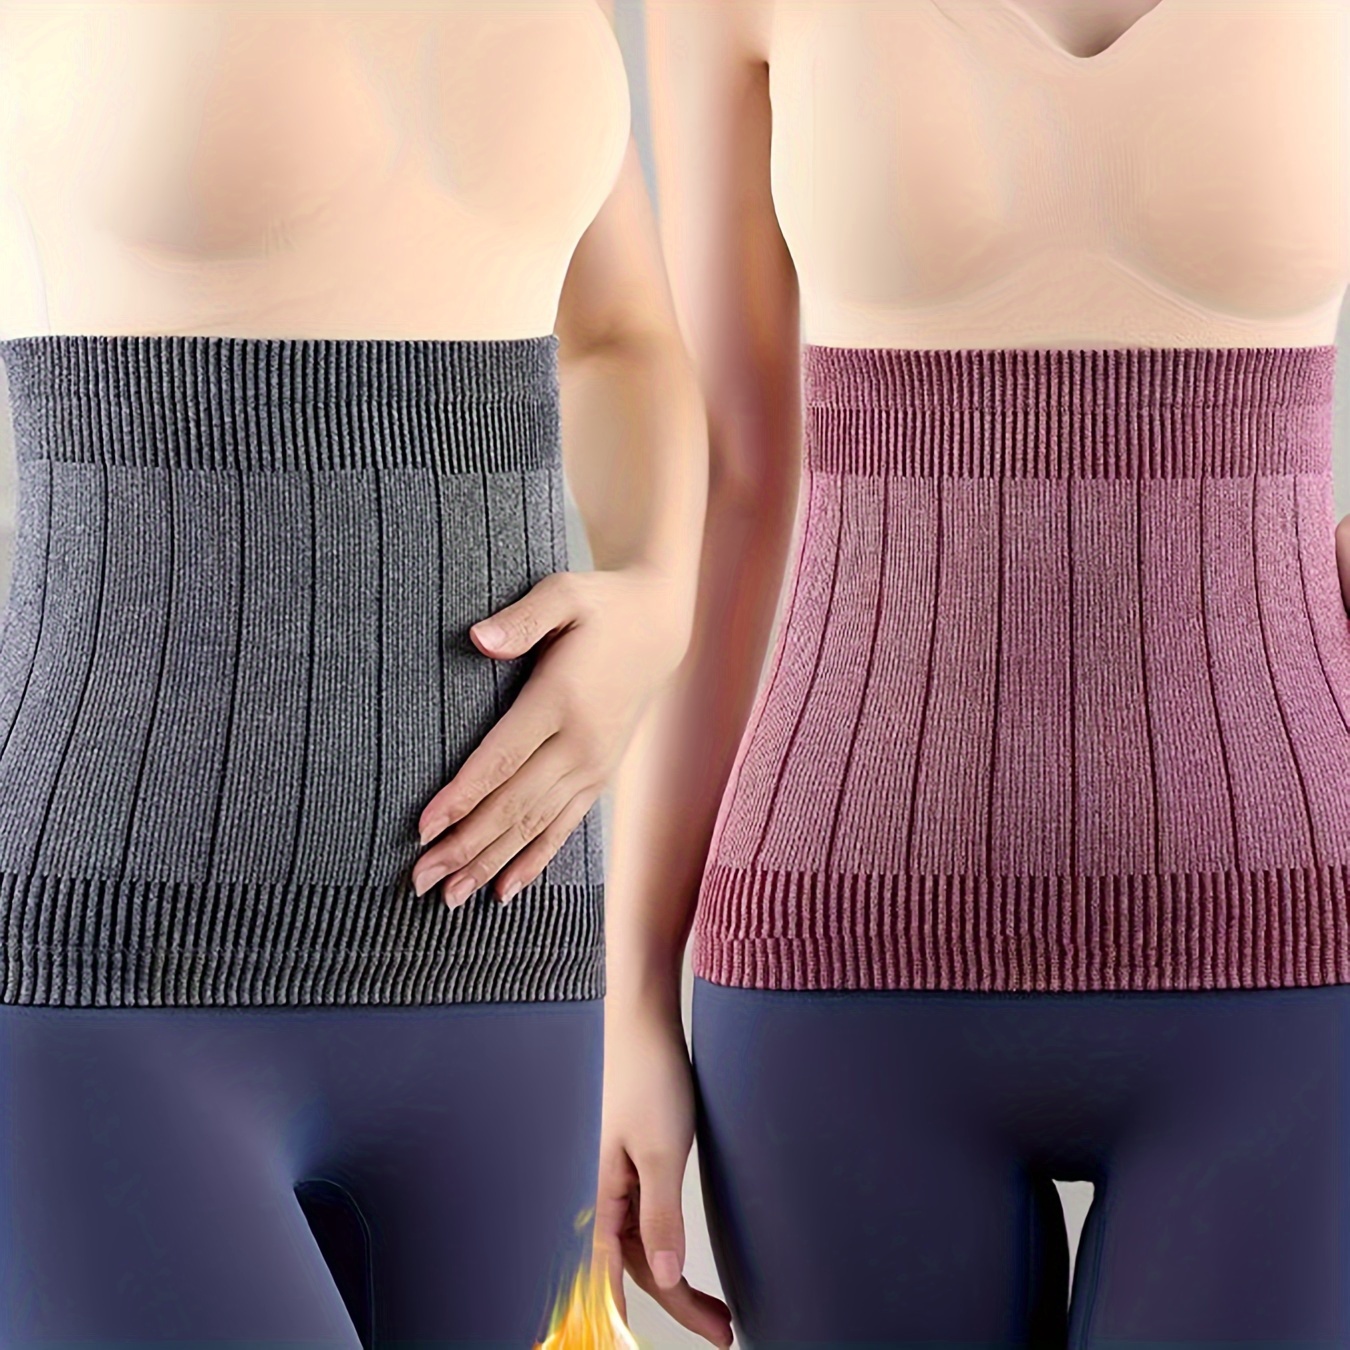 Order A Size Up, Slimming And Abdomen Shaping Waist Girdle, Belly  Postpartum Binding Slim Waist Shaping Clothes For Women